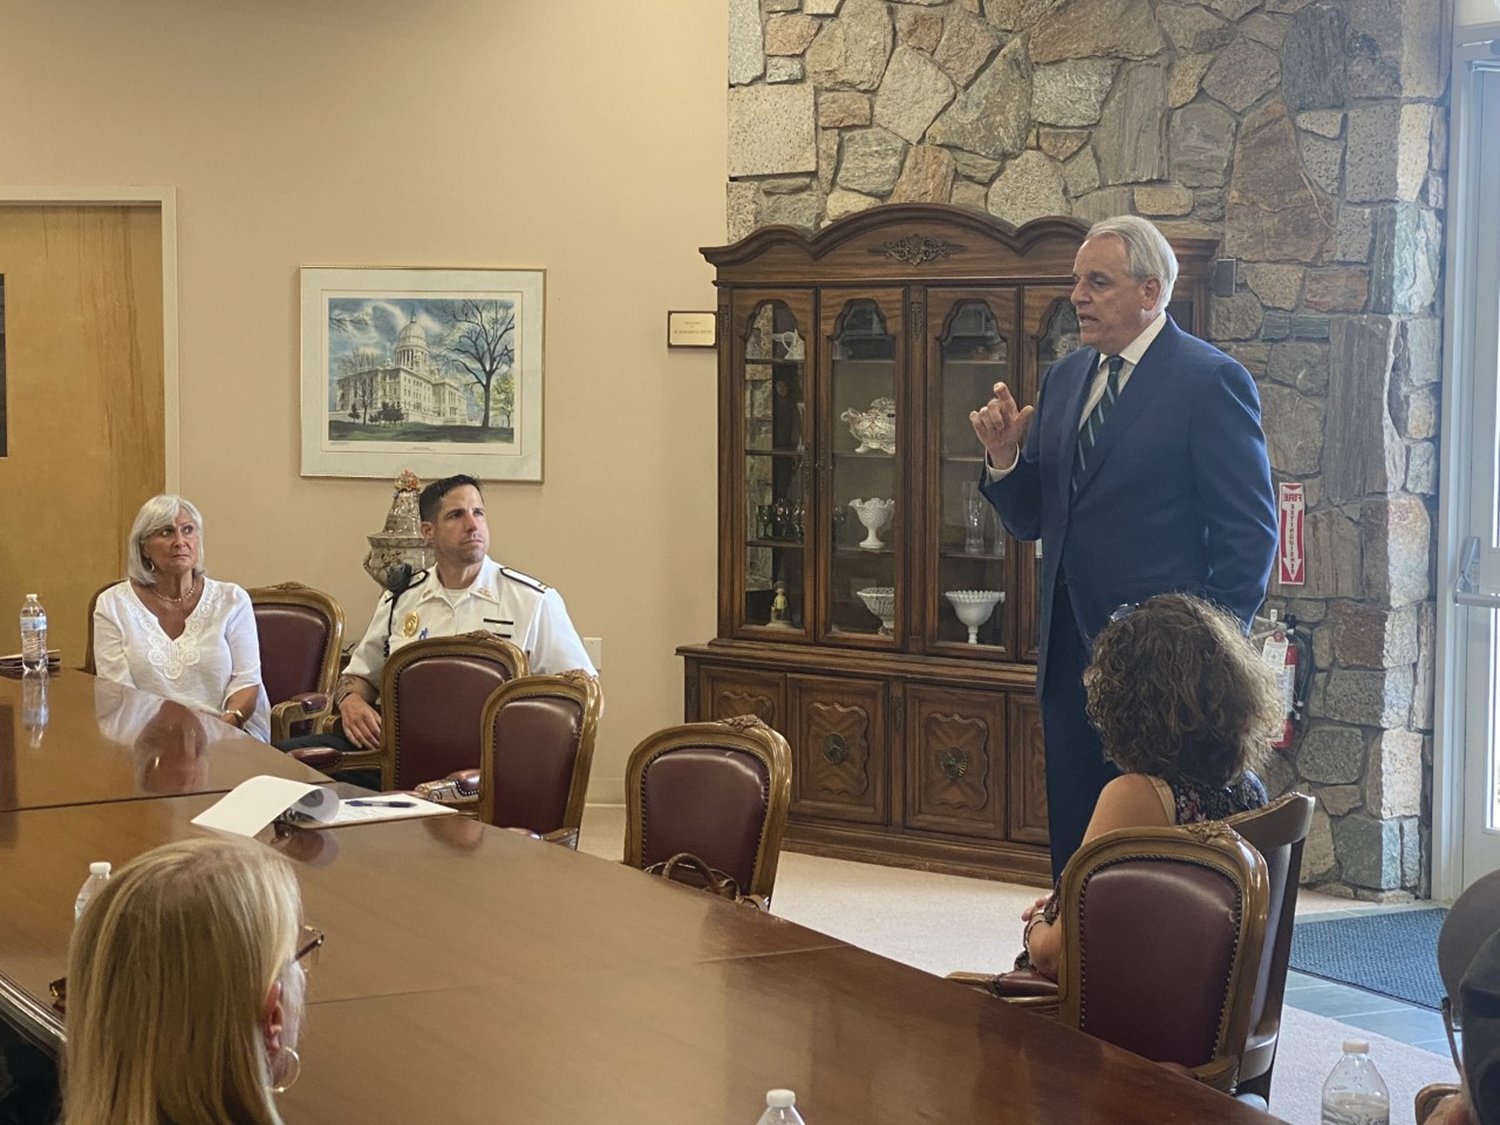 SPECIAL SESSION: Rhode Island Attorney General Peter Neronha addresses the unique District 2 Neighborhood Watch group at a recent meeting held inside the Johnston Senior Center Board Room.